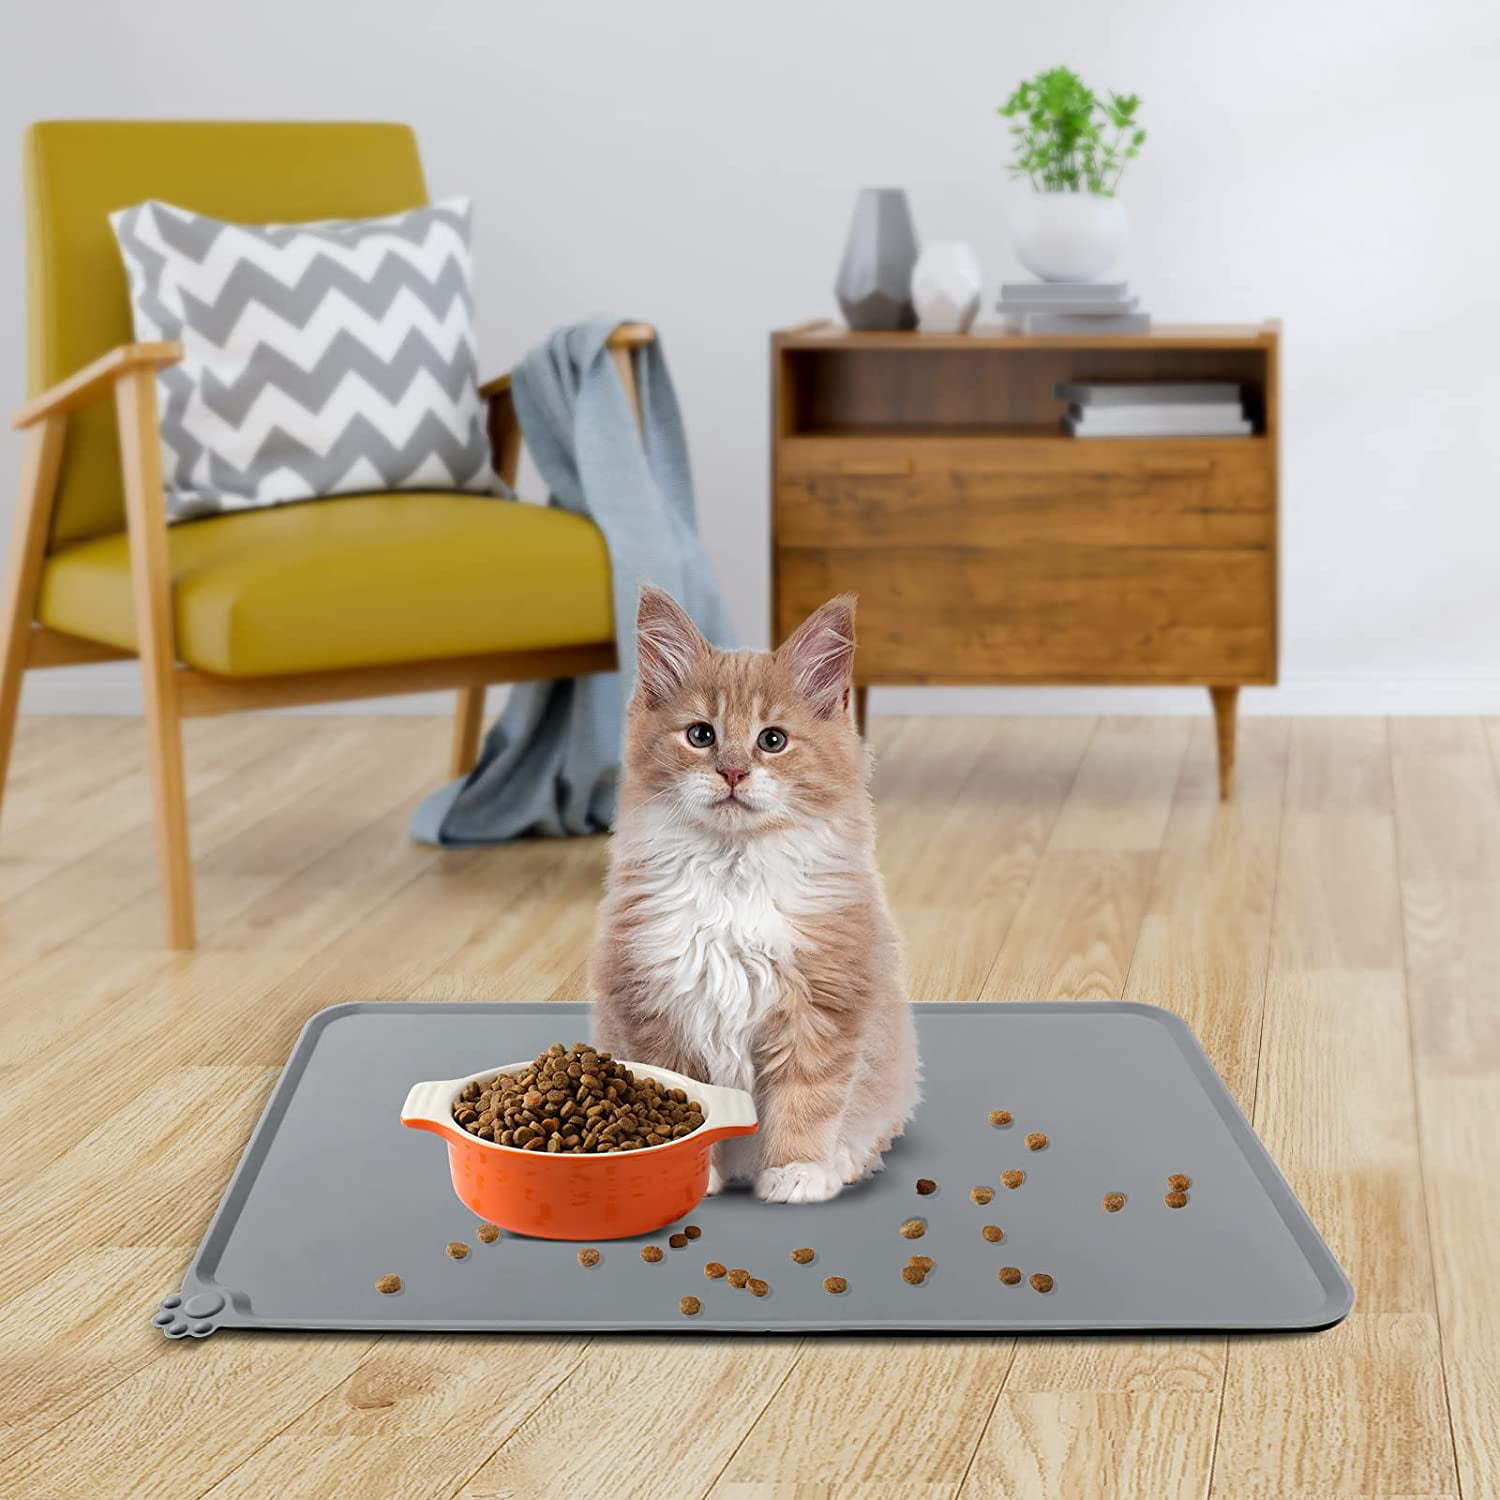 Dog Food Mat, Silicone Dog Cat Bowl Mat, Non Slip Waterproof Pet Feeding Mat FDA Grade Food Container Placemat for Small Animals, Size: Medium, Gray